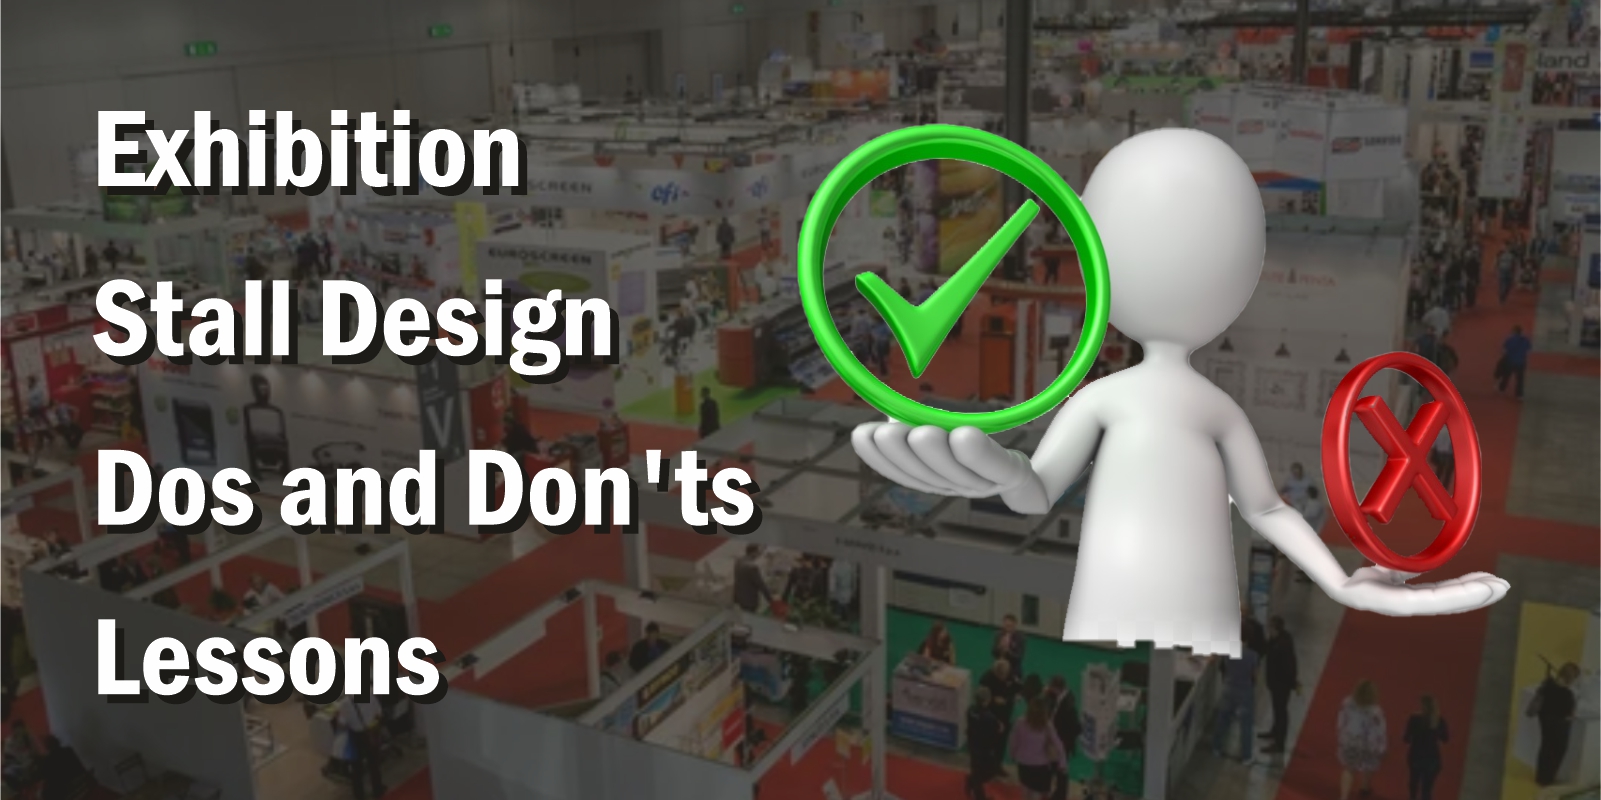 Exhibition Stall Design Dos and Don’ts Lessons 